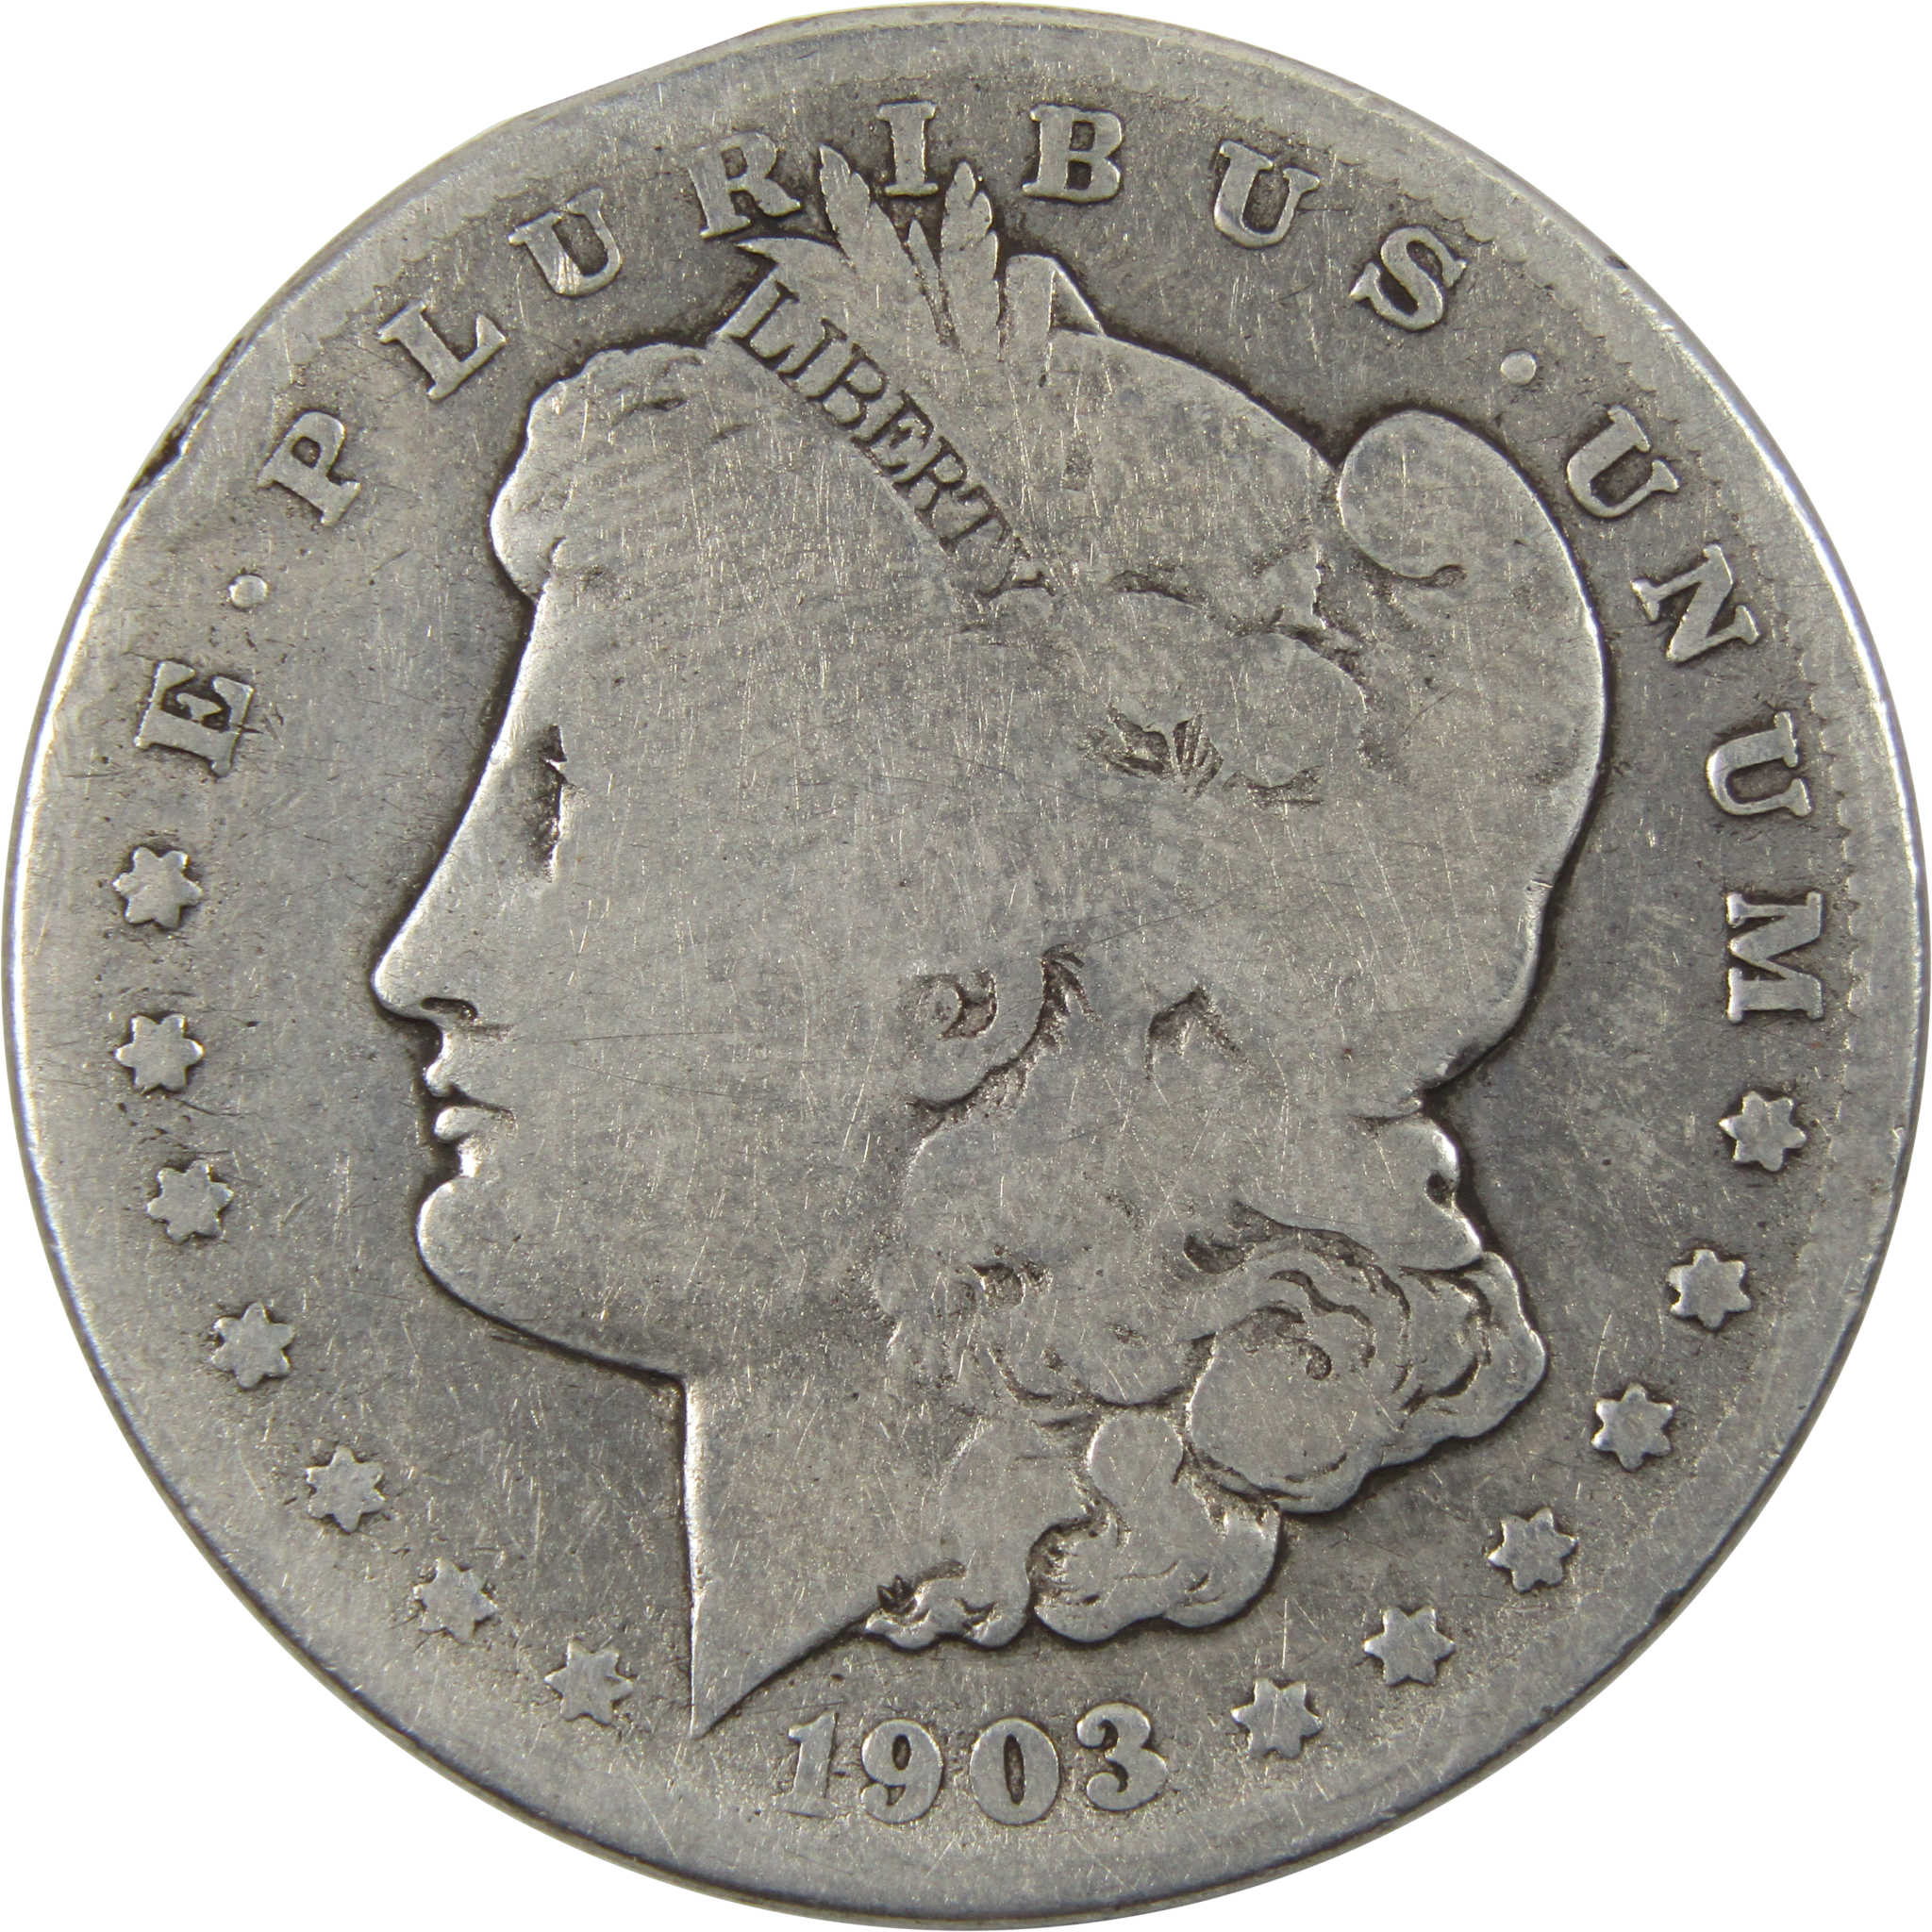 1903 S Morgan Dollar AG About Good Details 90% Silver $1 SKU:I9631 - Morgan coin - Morgan silver dollar - Morgan silver dollar for sale - Profile Coins &amp; Collectibles